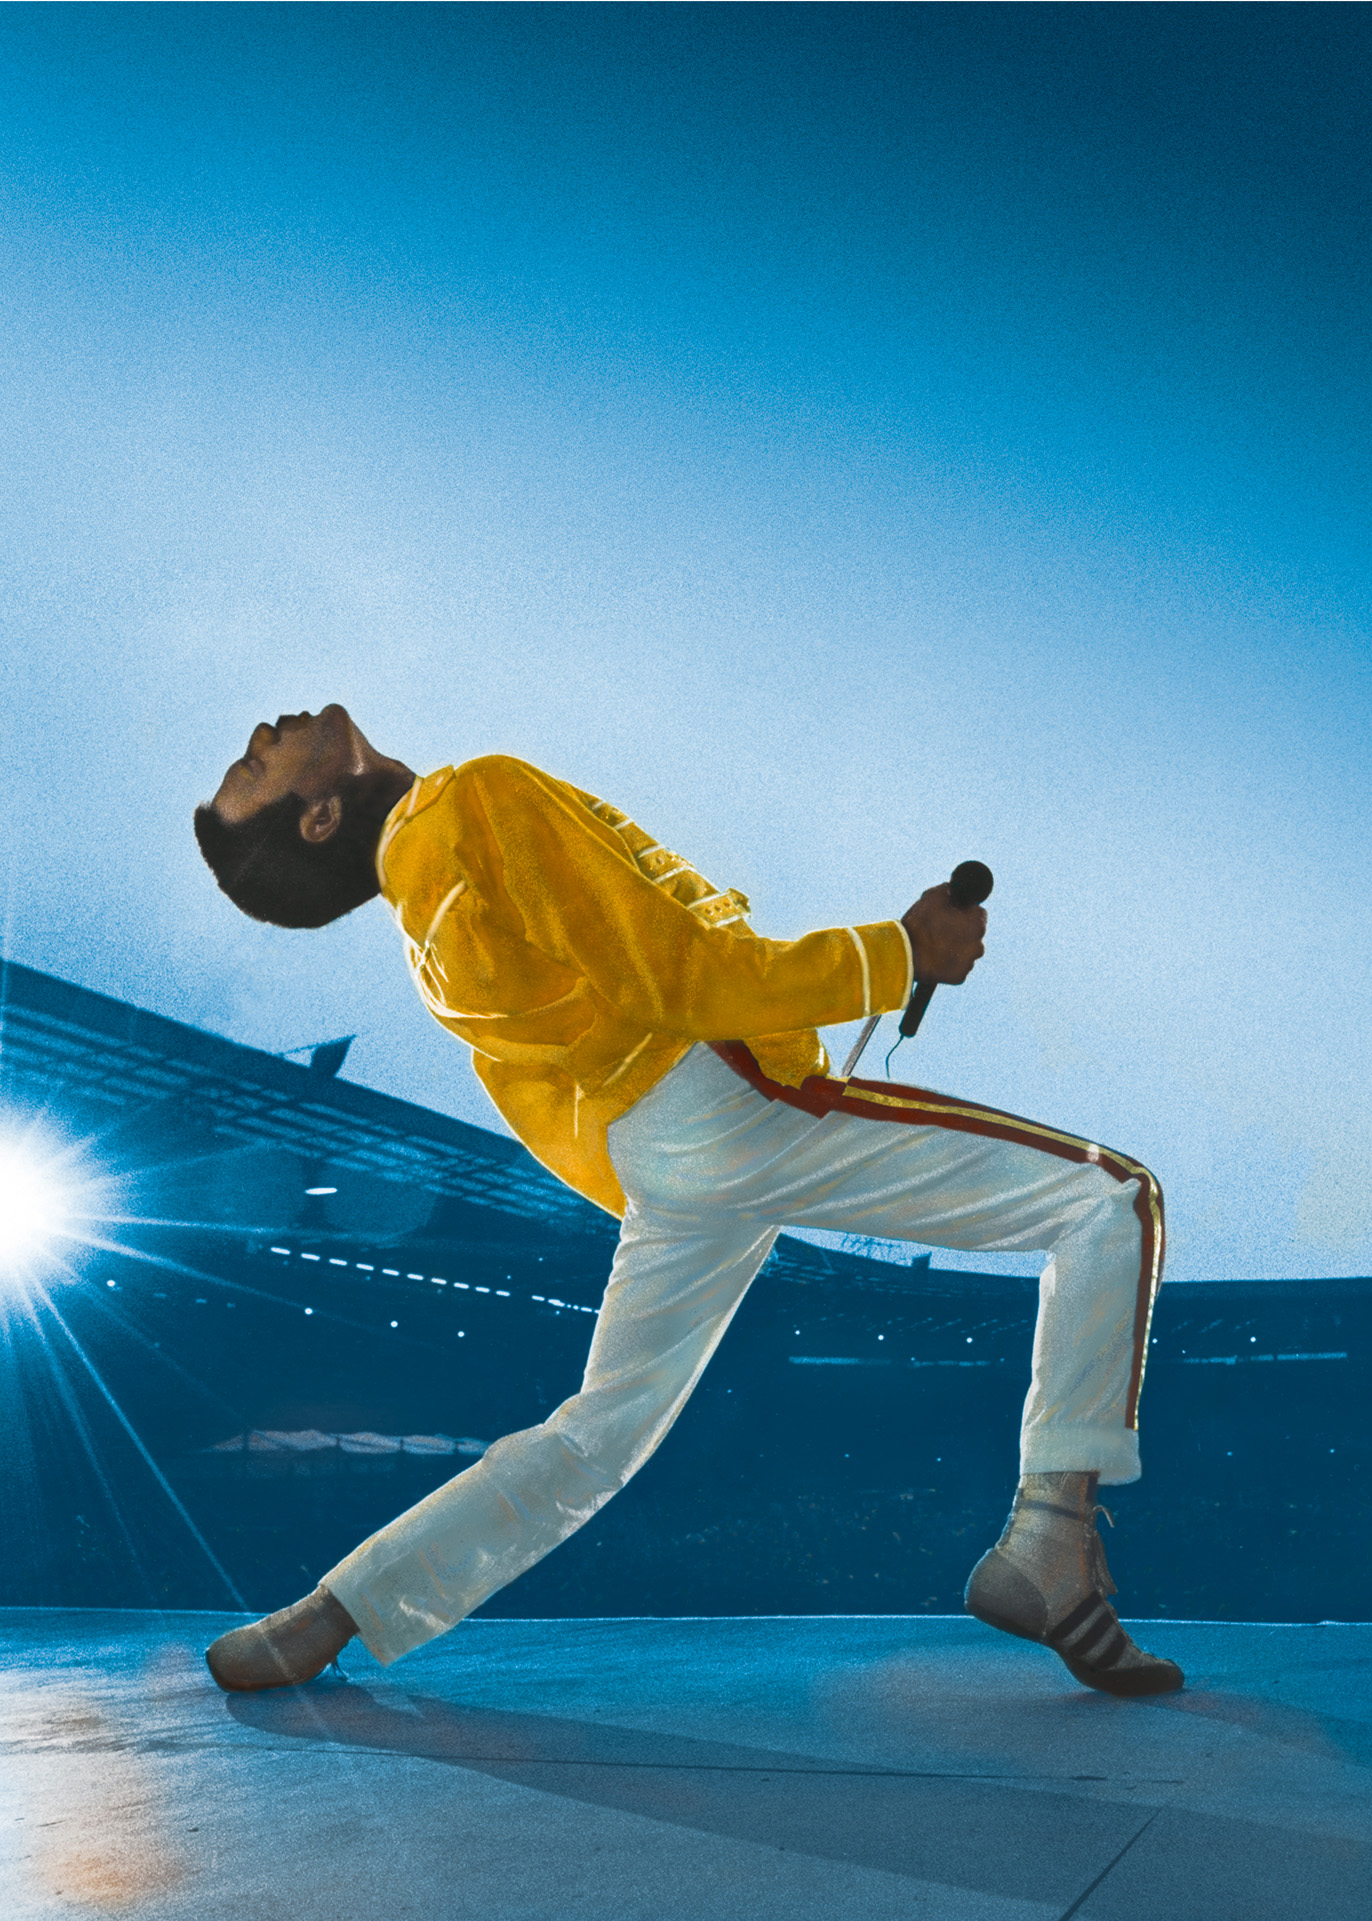 Fracción izquierda Cortar Freddie Mercury on Twitter: "Freddie on this day in 1986, when Queen  performed at Wembley Stadium for the iconic 'Queen Live At Wembley' 💛  ©Copyright Queen Productions Ltd https://t.co/sFKt9EJKZh" / Twitter